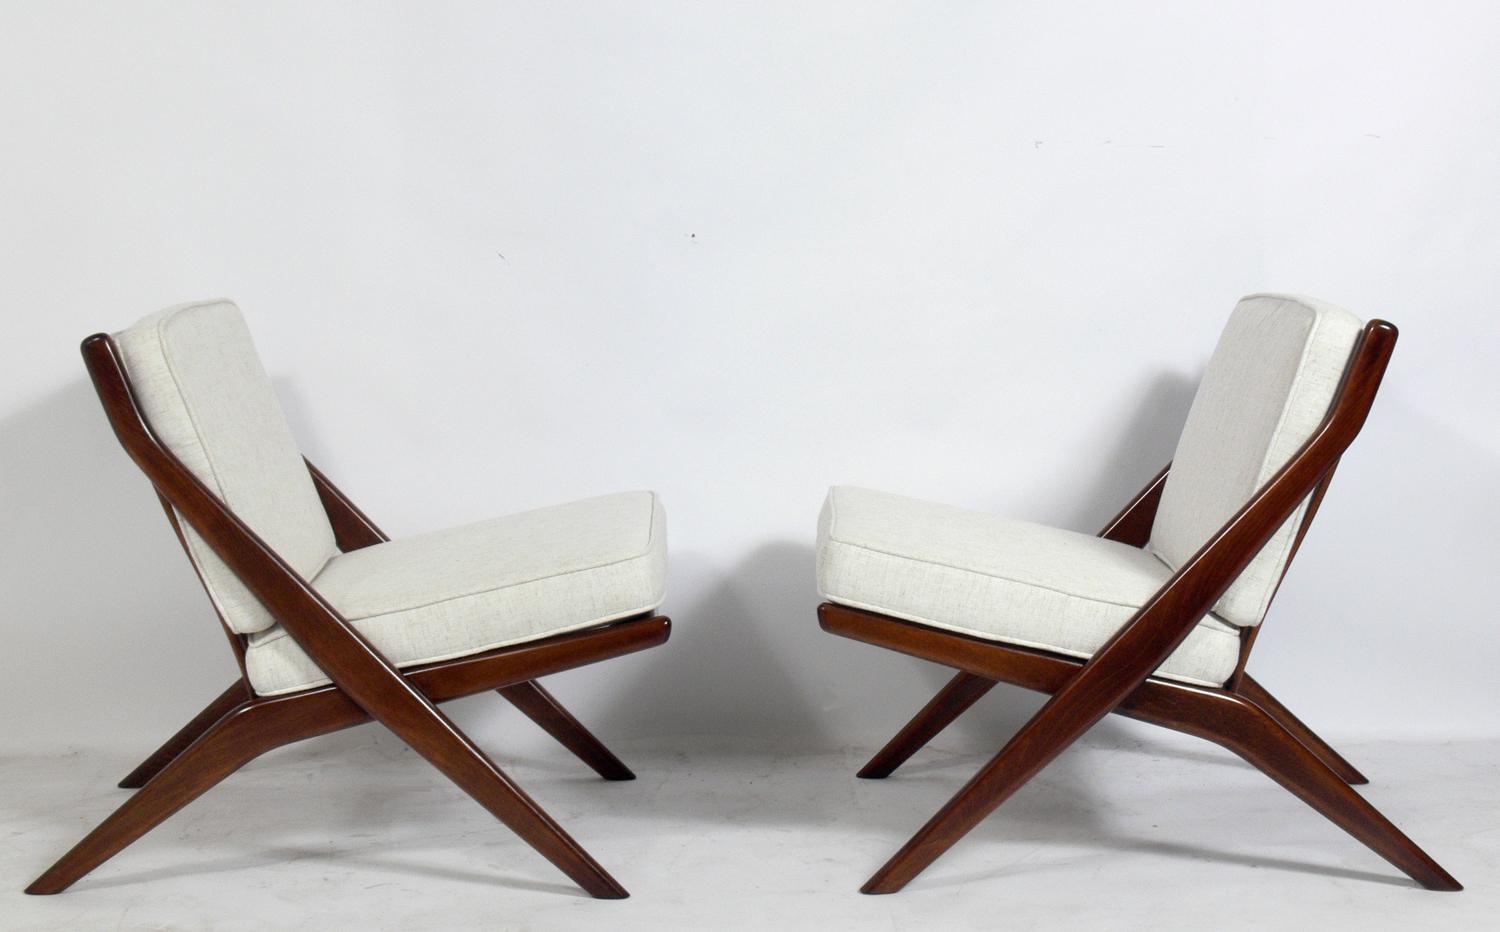 Pair of Danish modern sculptural scissor chairs, designed by Folke Ohlsson for DUX, circa 1960s. Refinished and reupholstered in an ivory color herringbone upholstery.